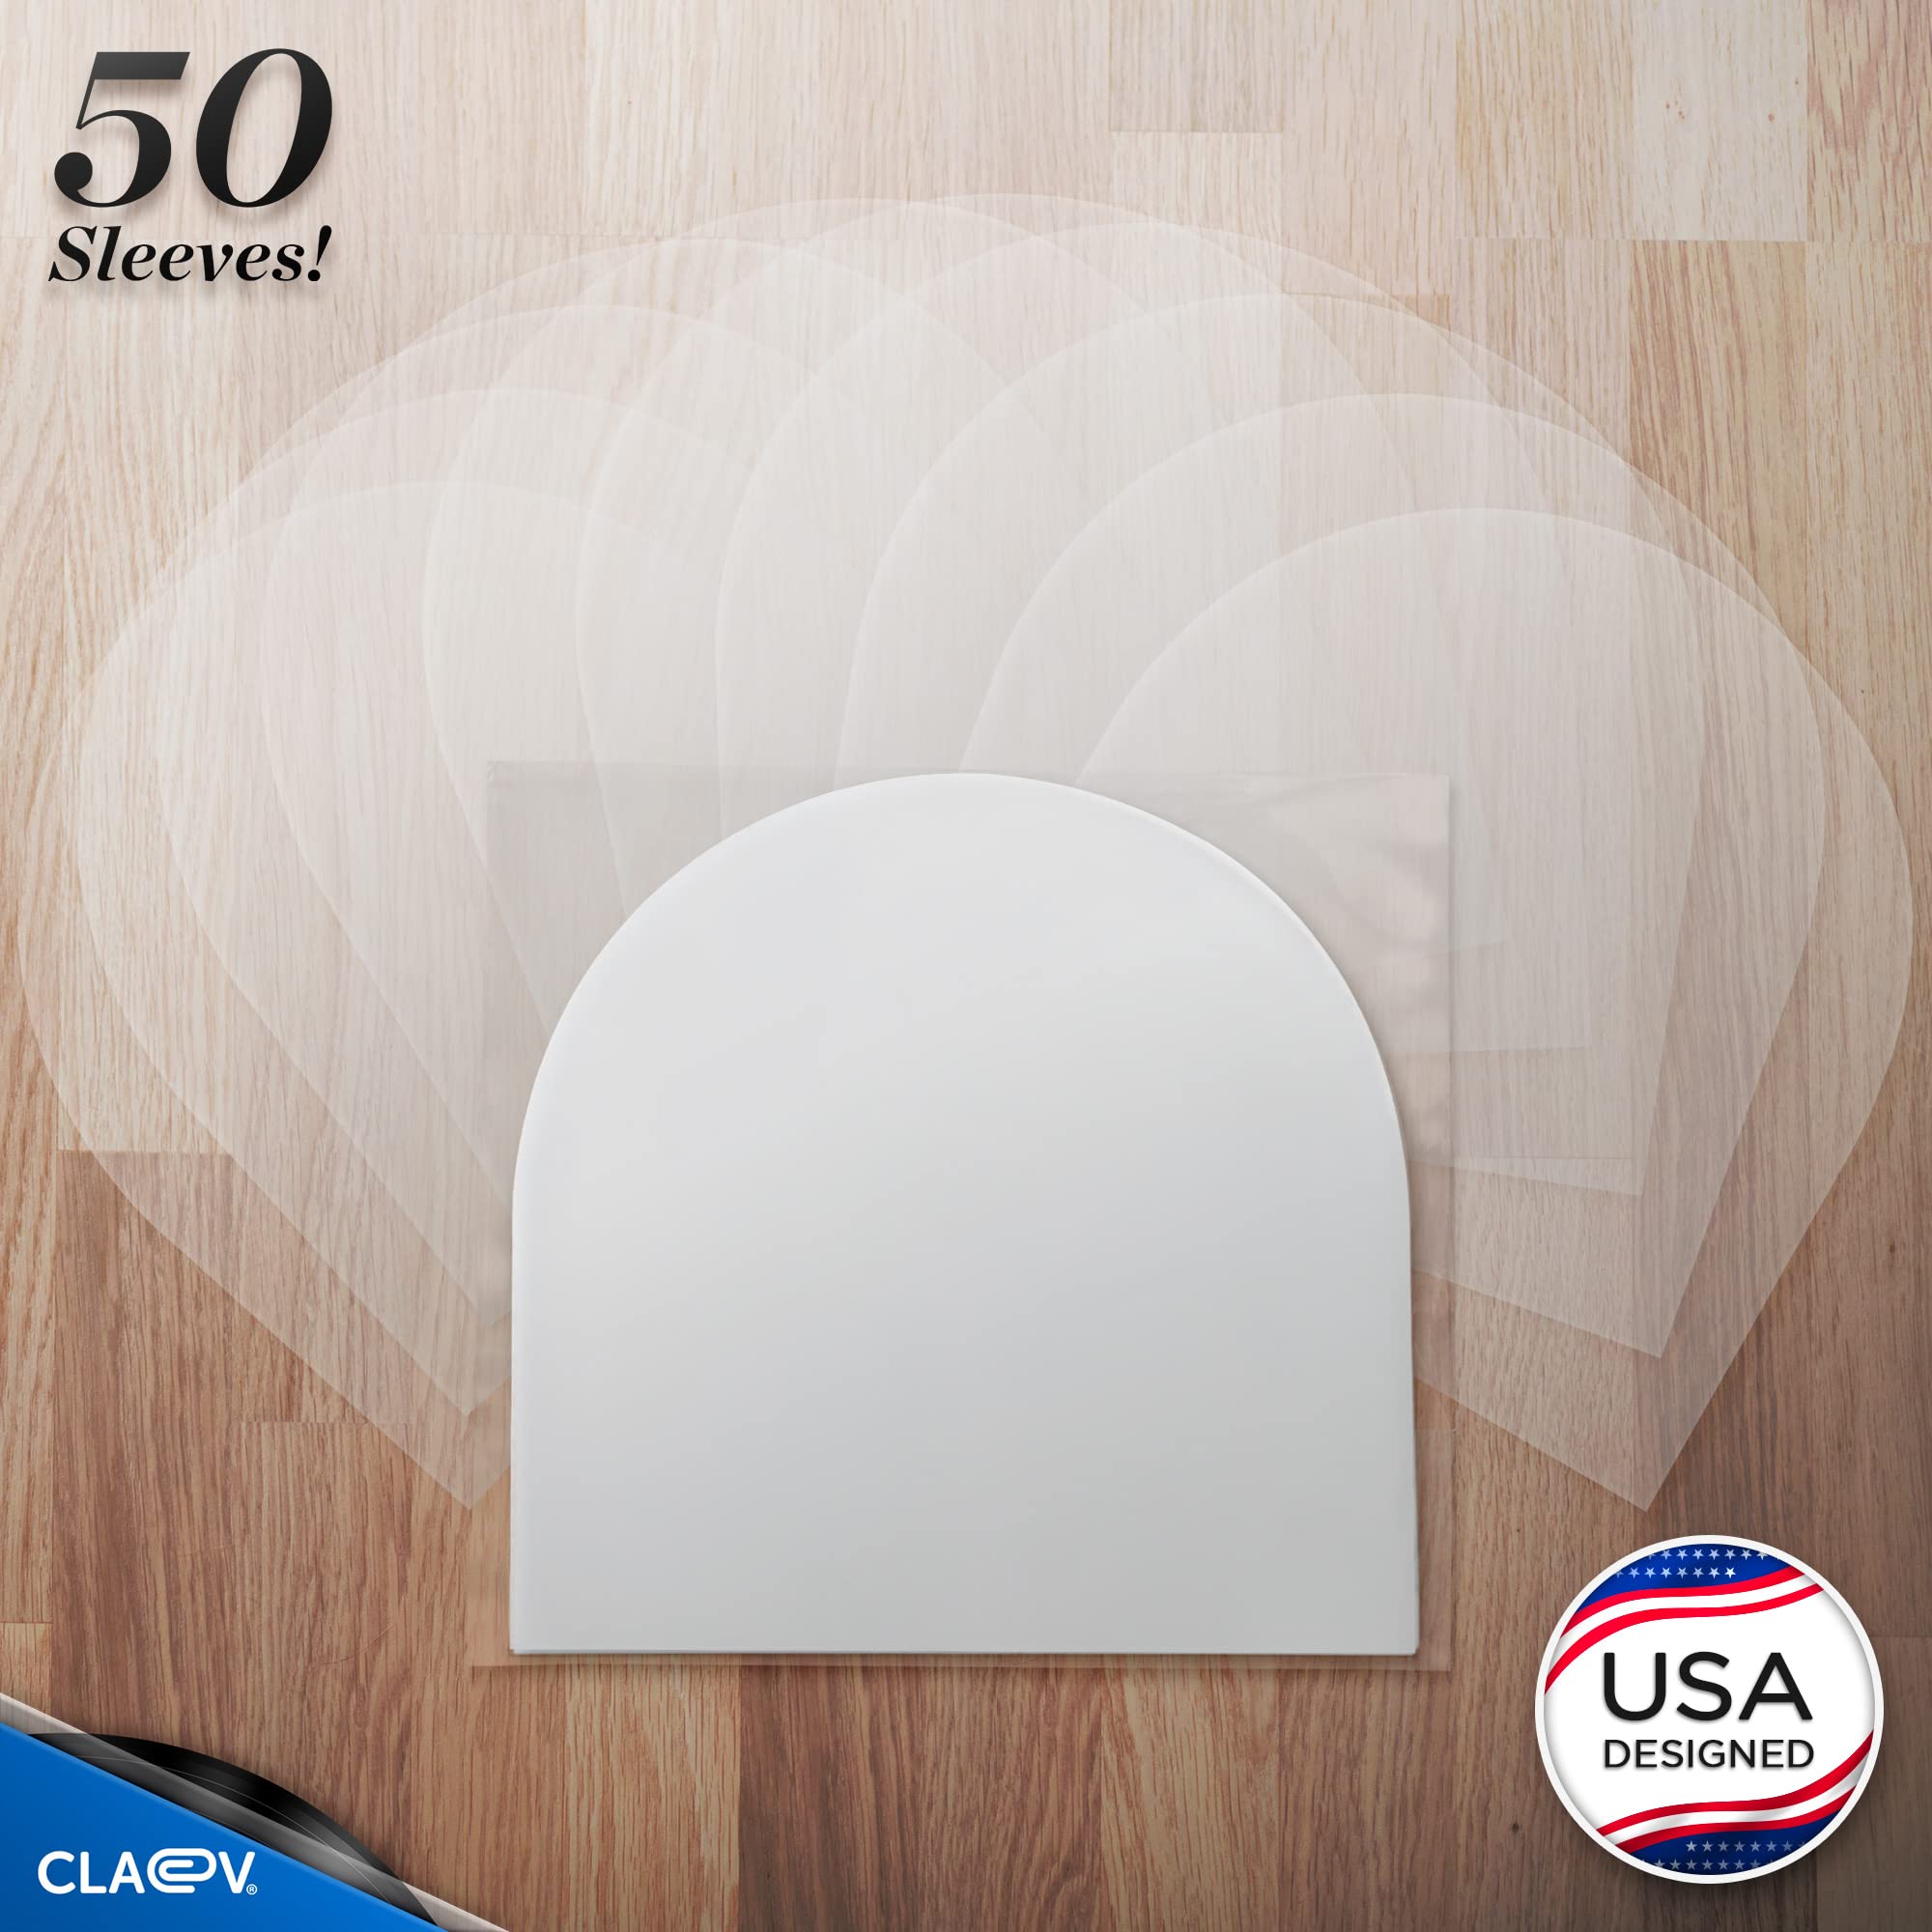 Claev 50 Inner Record Sleeves for 33 LP Vinyl Records (12 inch, U-Shape, Translucent), No Bunching Anti Static Protective Covers for Album Storage